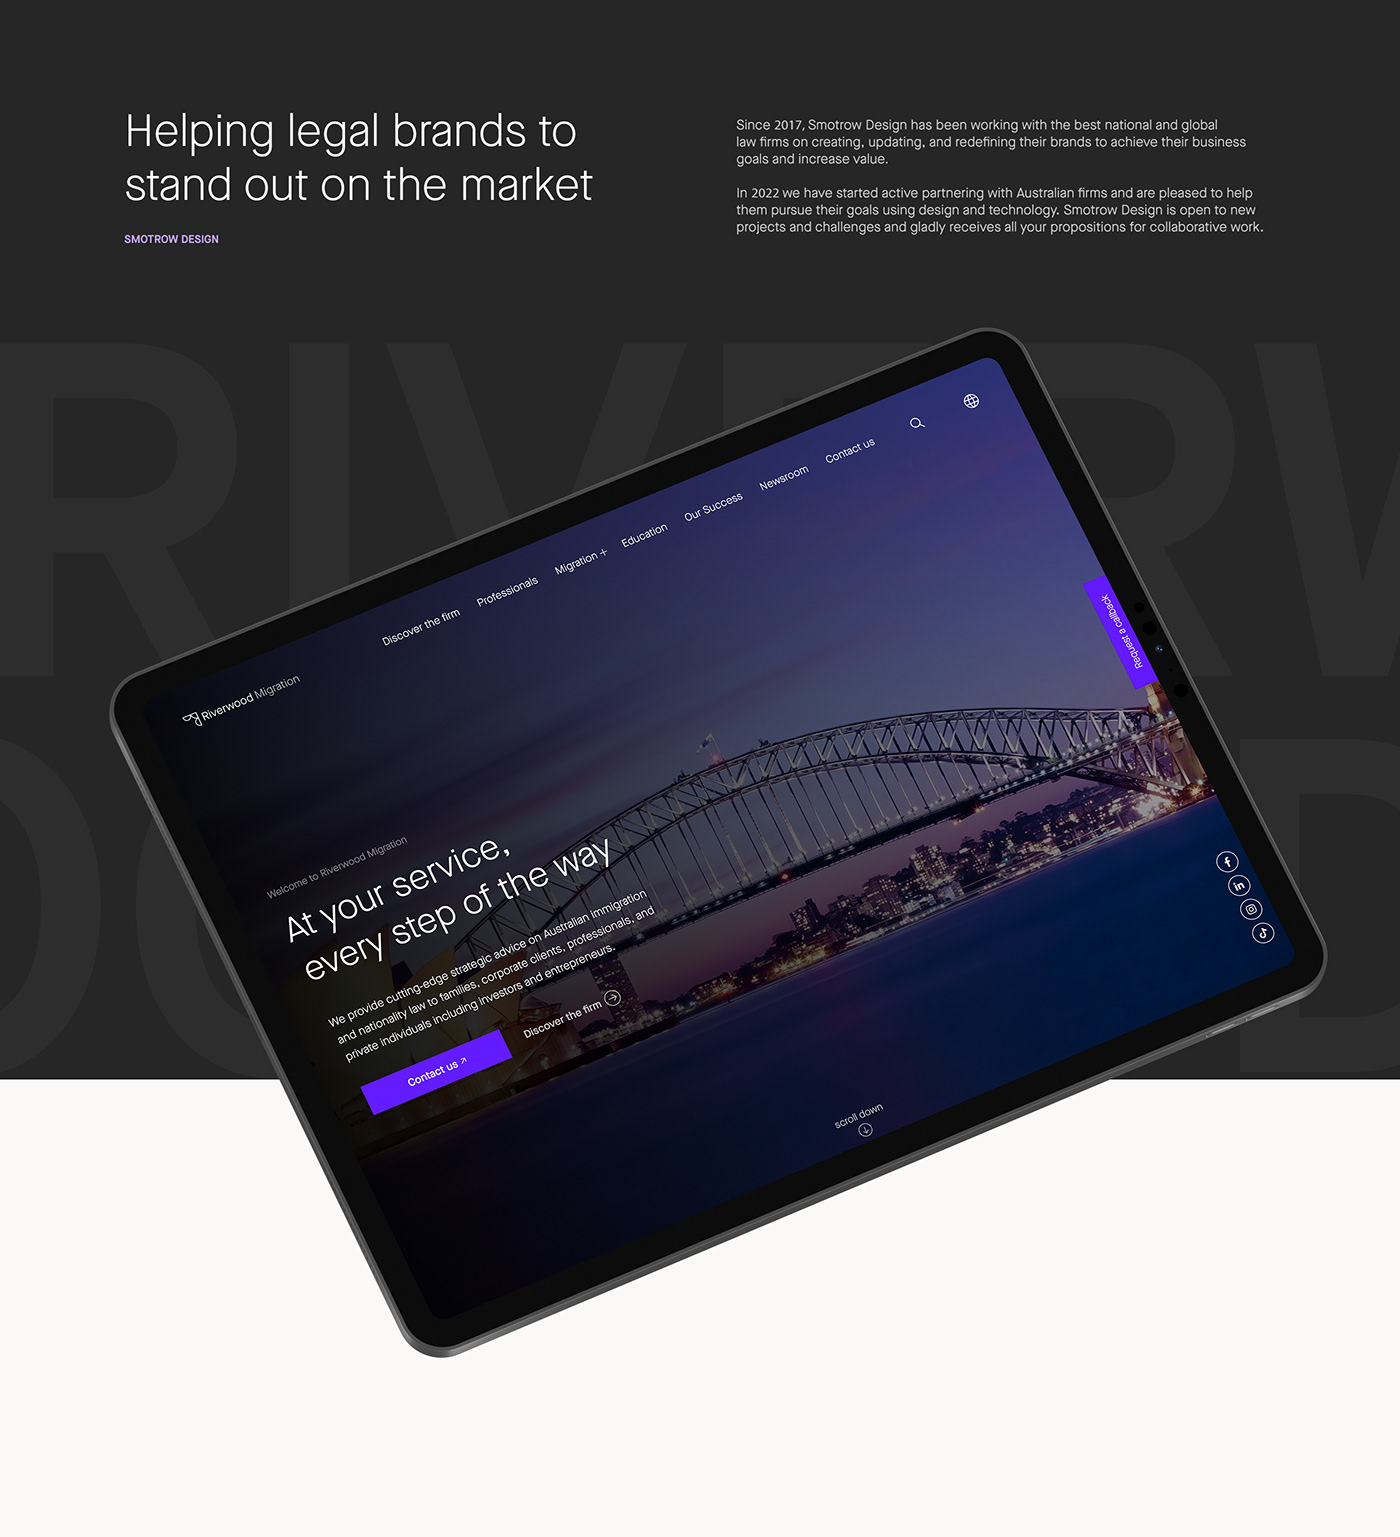 Smotrow Design creates brand and digital experiences for law firm, advocates, and government